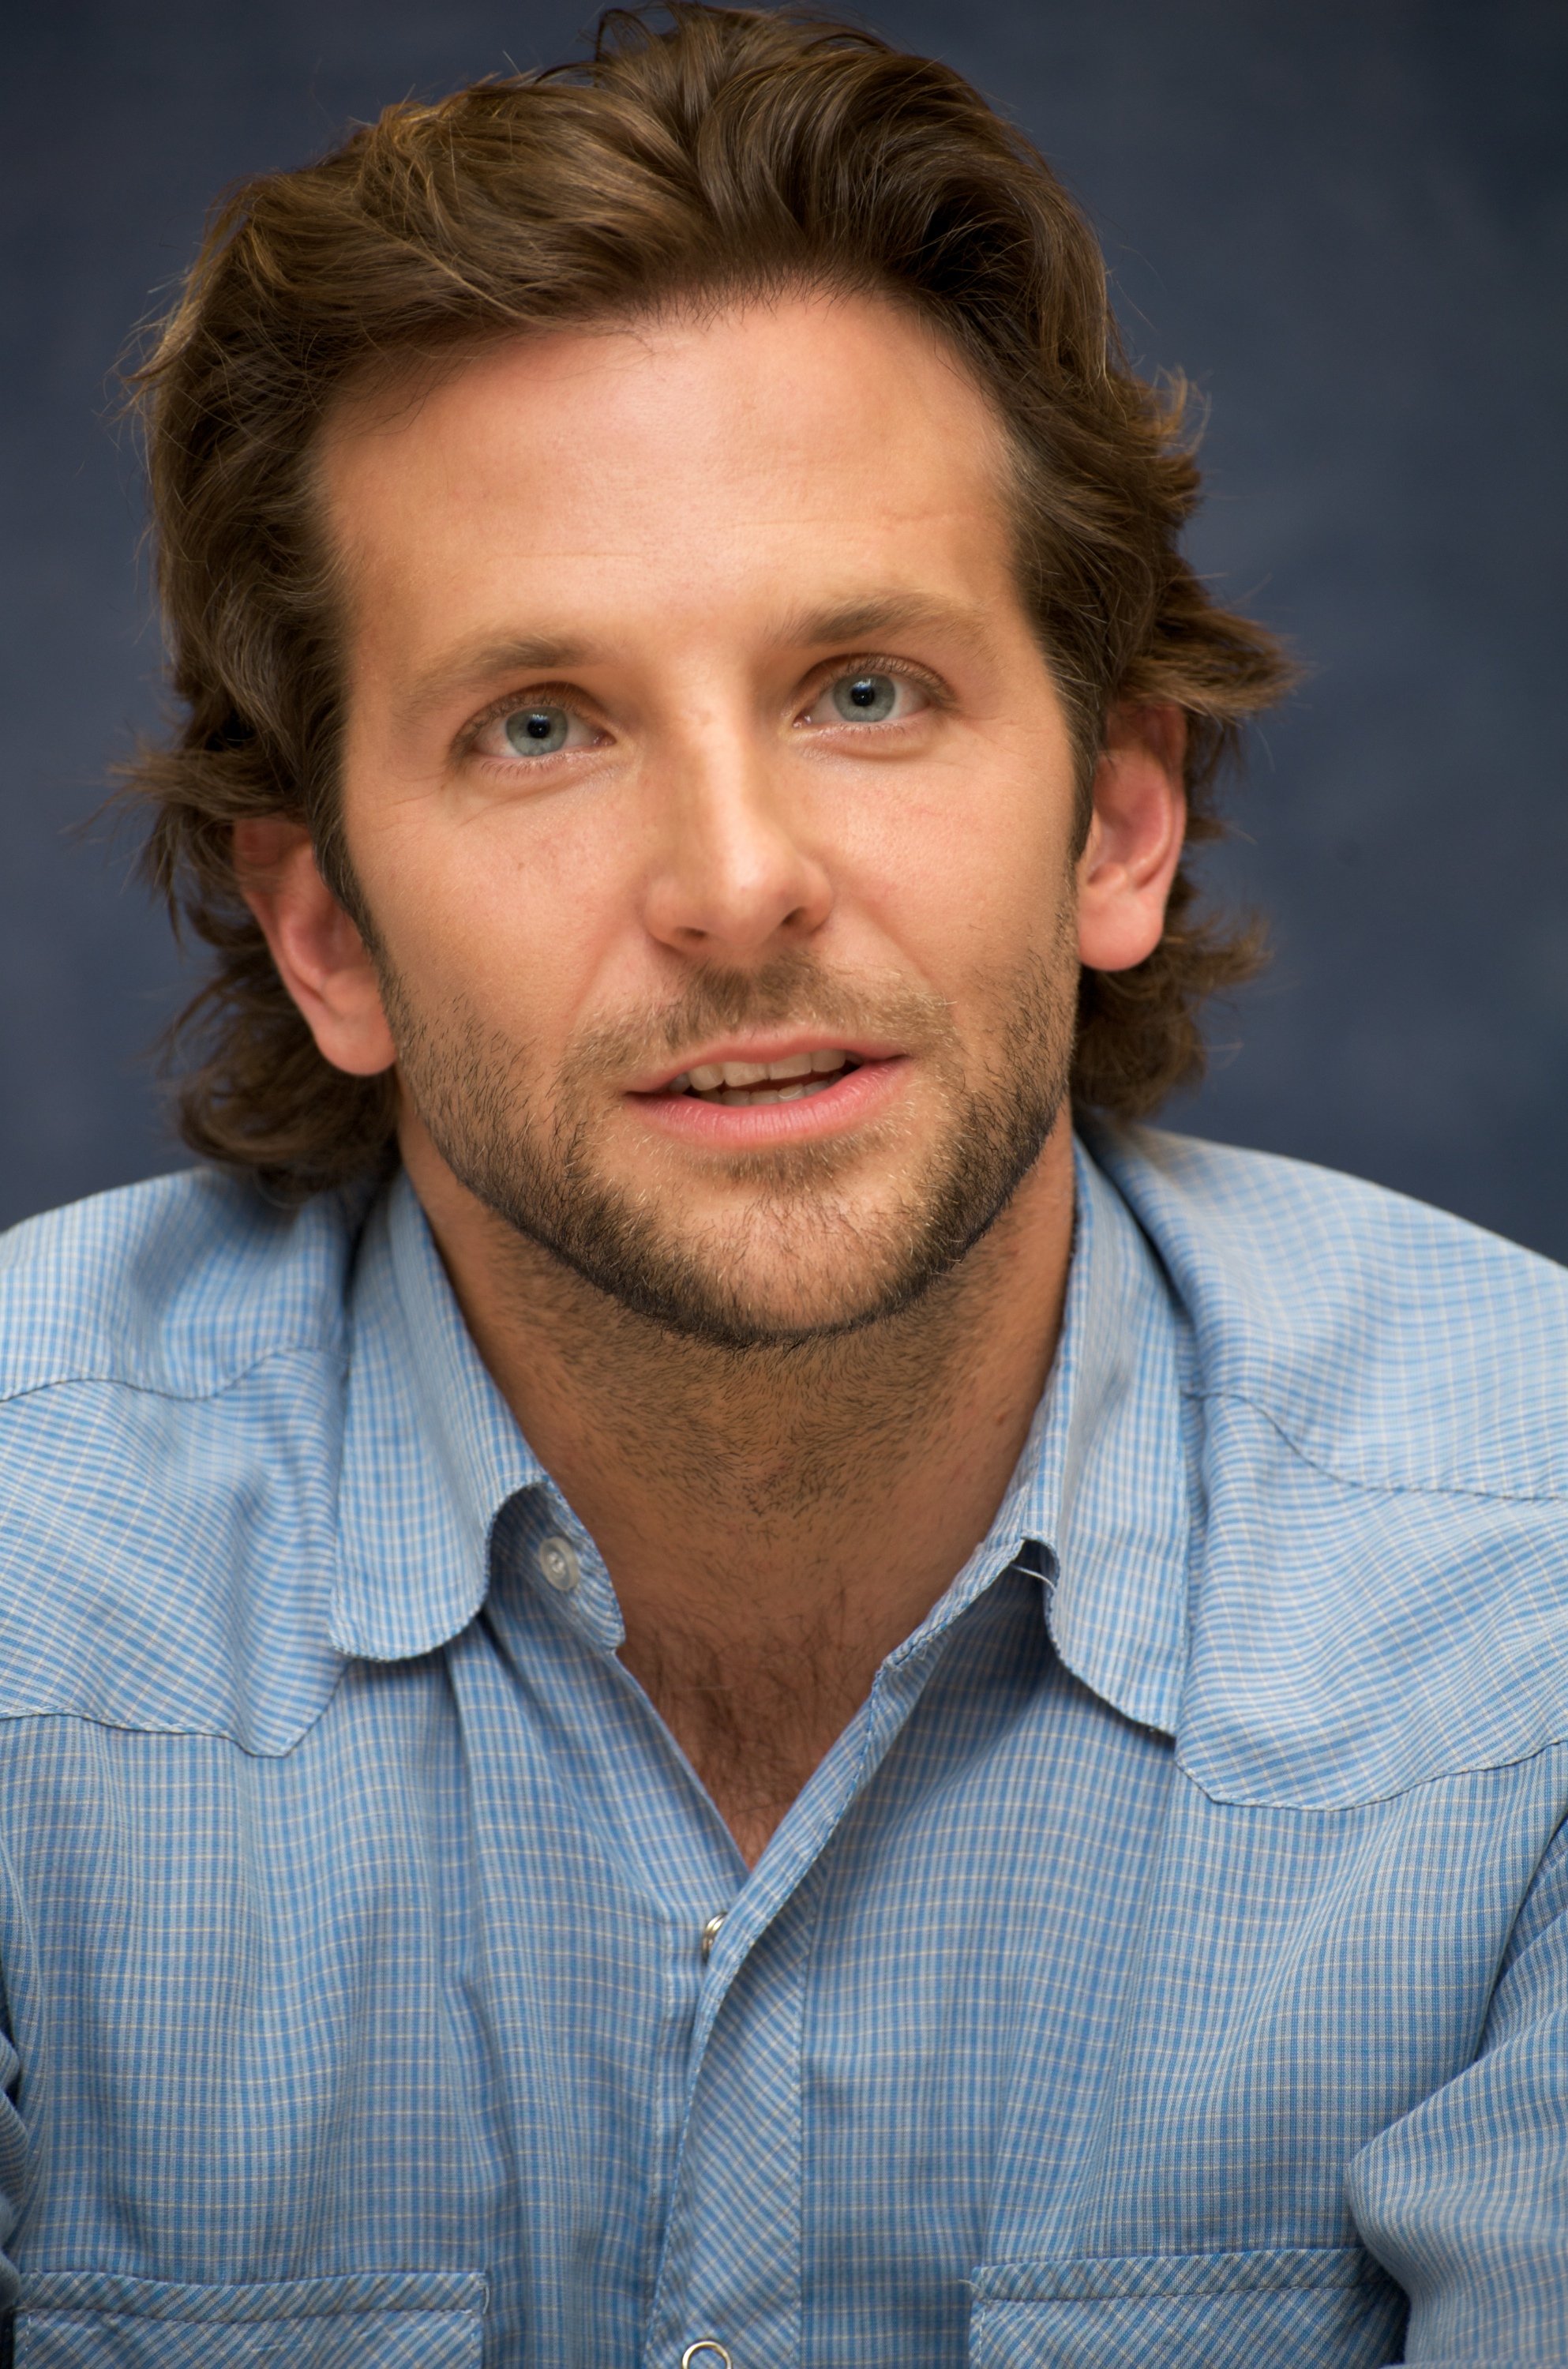 Bradley Cooper at the "Yes Man" press conference at the Beverly Hilton Hotel on December 4, 2008 in Beverly Hills, California. | Source: Getty Images